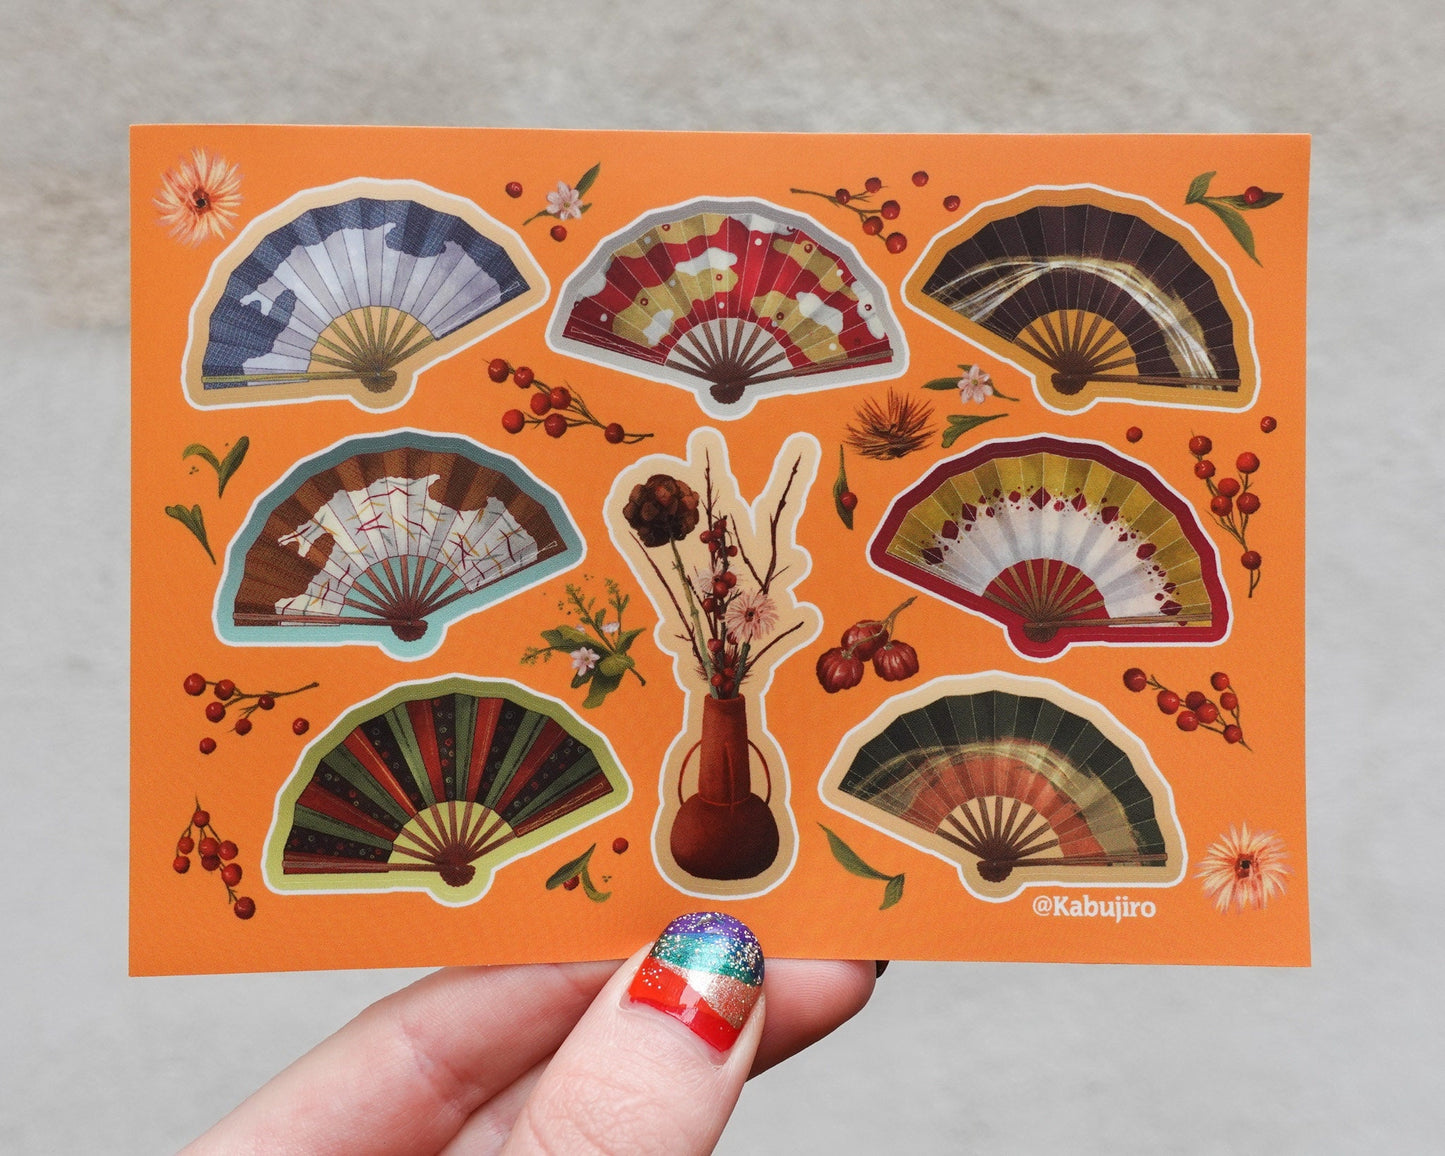 Japanese Fans and Ikebana – Stickersheet with 8 Vinyl Stickers